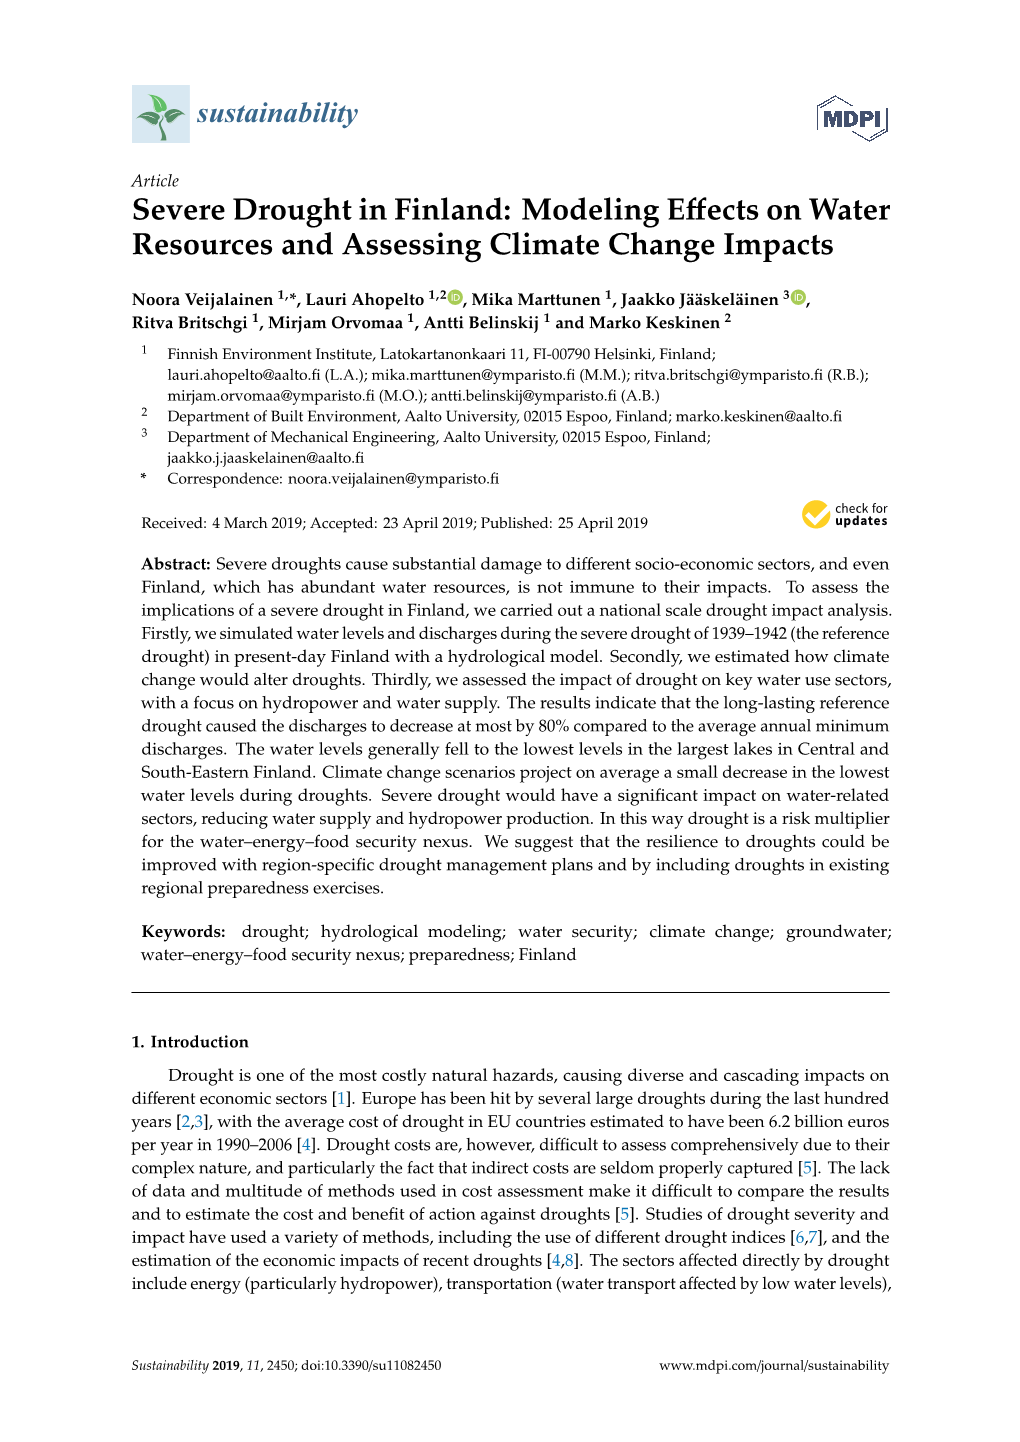 Severe Drought in Finland: Modeling Eﬀects on Water Resources and Assessing Climate Change Impacts